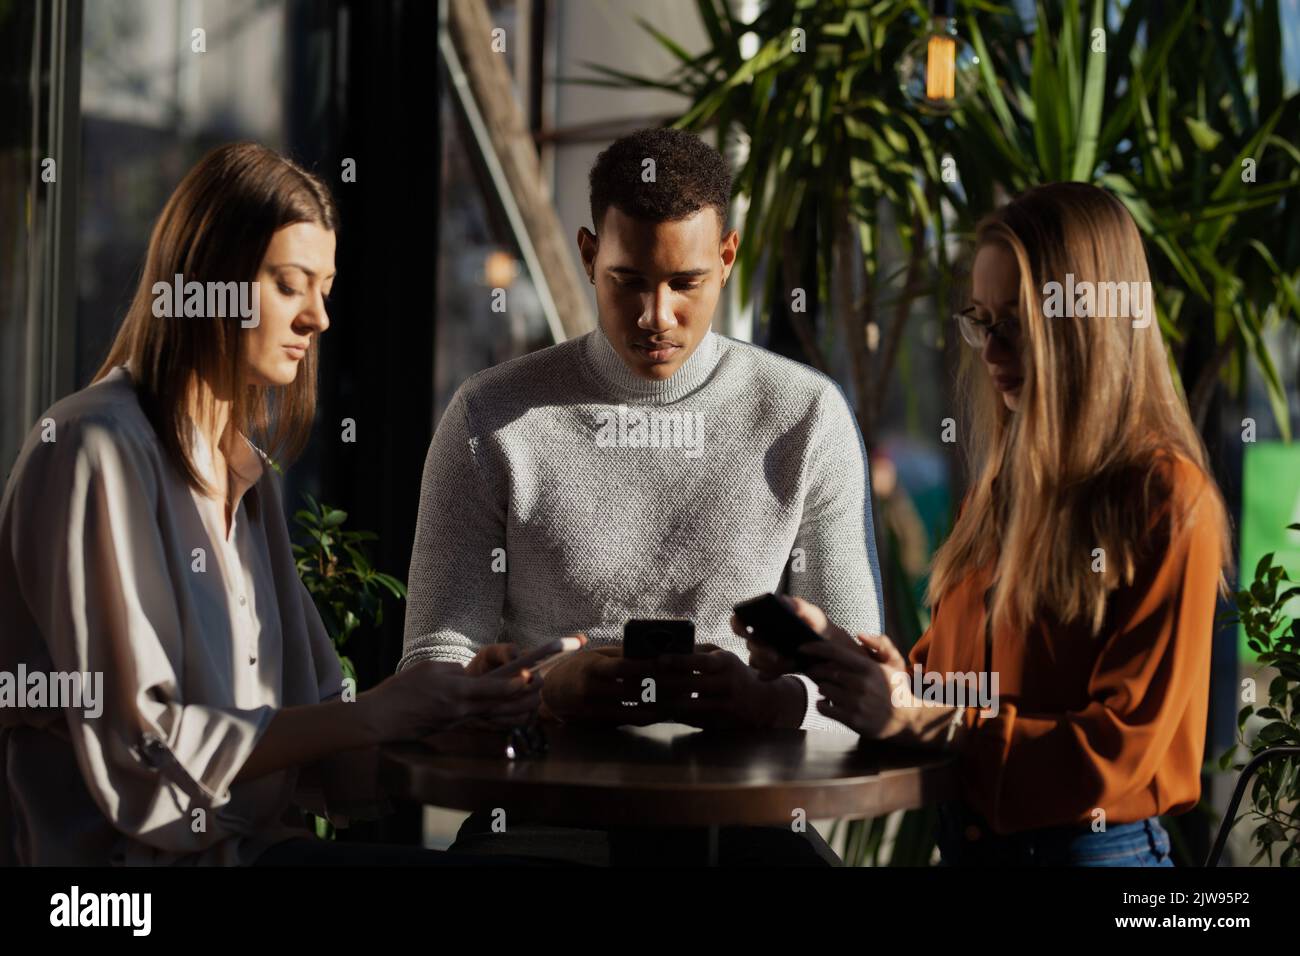 Three friends in a cafe bar using phone. Looking at smartphones unconscious about the surroundings. Stock Photo